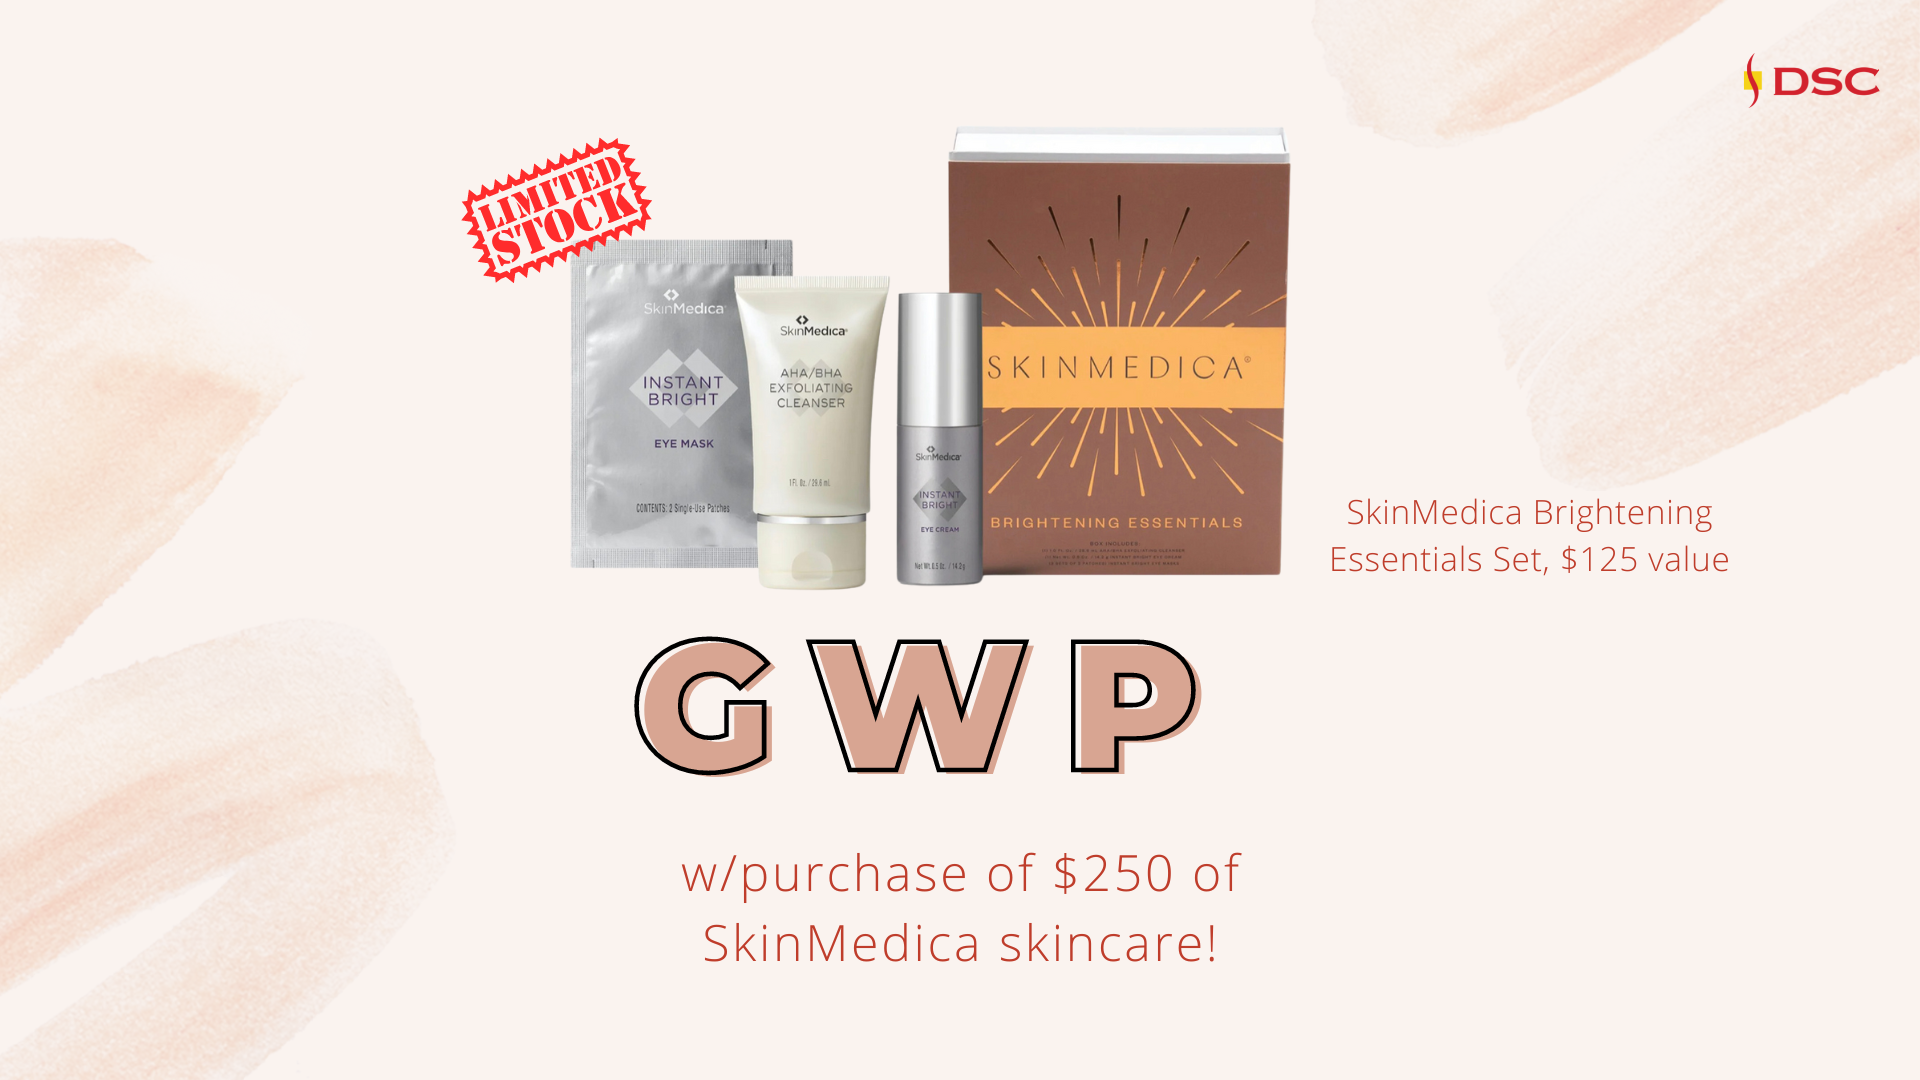 11/11 SkinMedica Skincare DSC Promo free GWP with over $250 purchase of a SkinMedica Essentials Set with Instant Bright Eye Cream, Instant Eye Masks, and AHA/BHACleanser